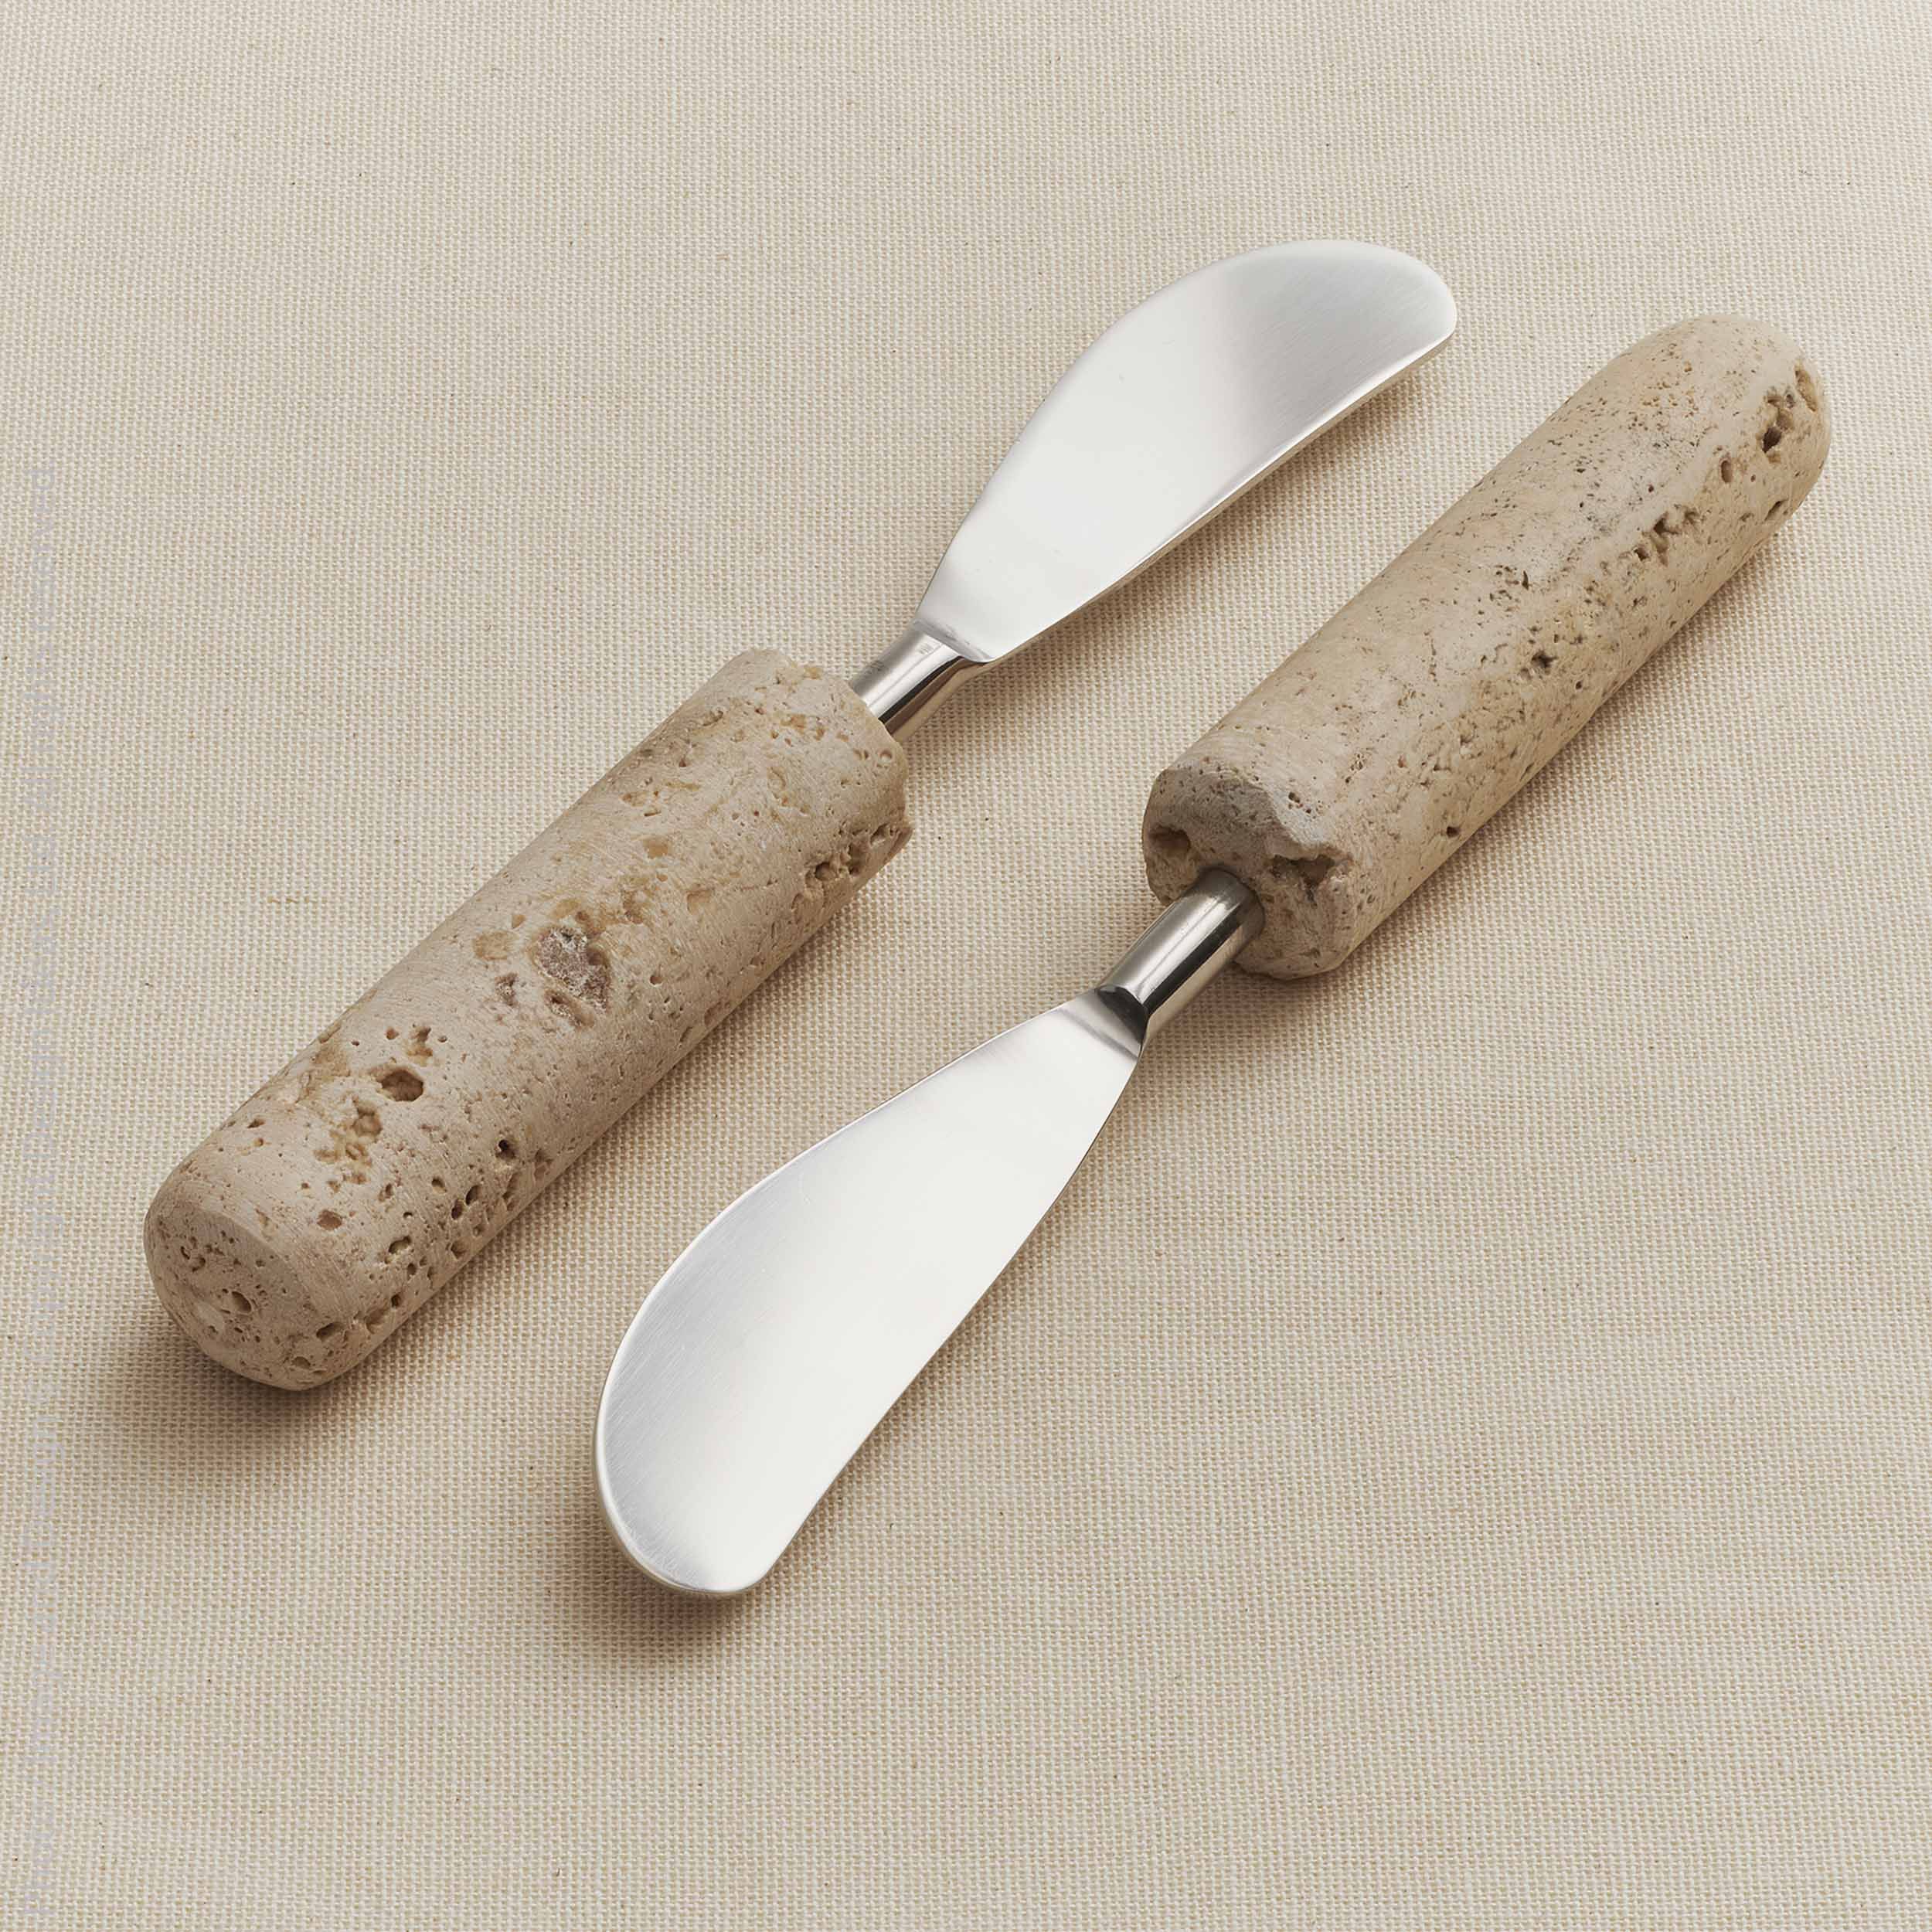 Marbella™ Hand Crafted Metal and Travertine Spreaders (set of 2) | Texxture Home